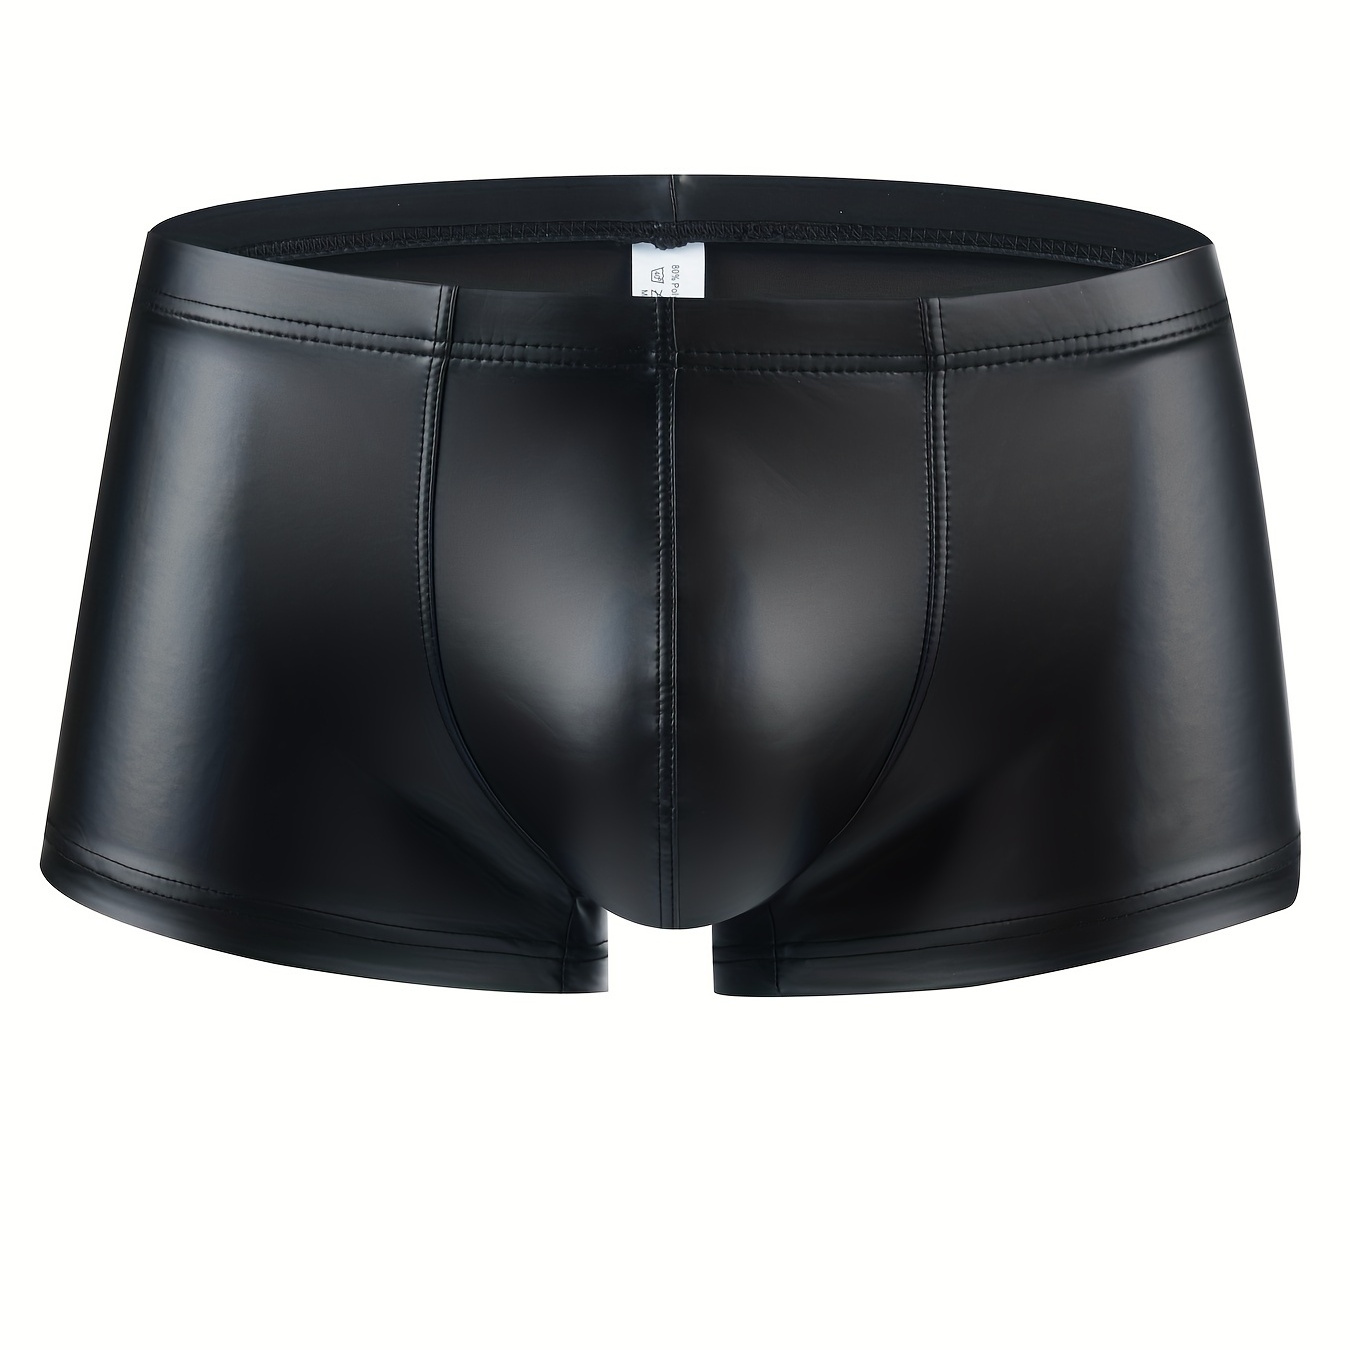 

Men's Black Antibacterial Underwear, Casual Boxer Briefs Shorts, Breathable Comfy Stretchy Boxer Shorts For Night Club